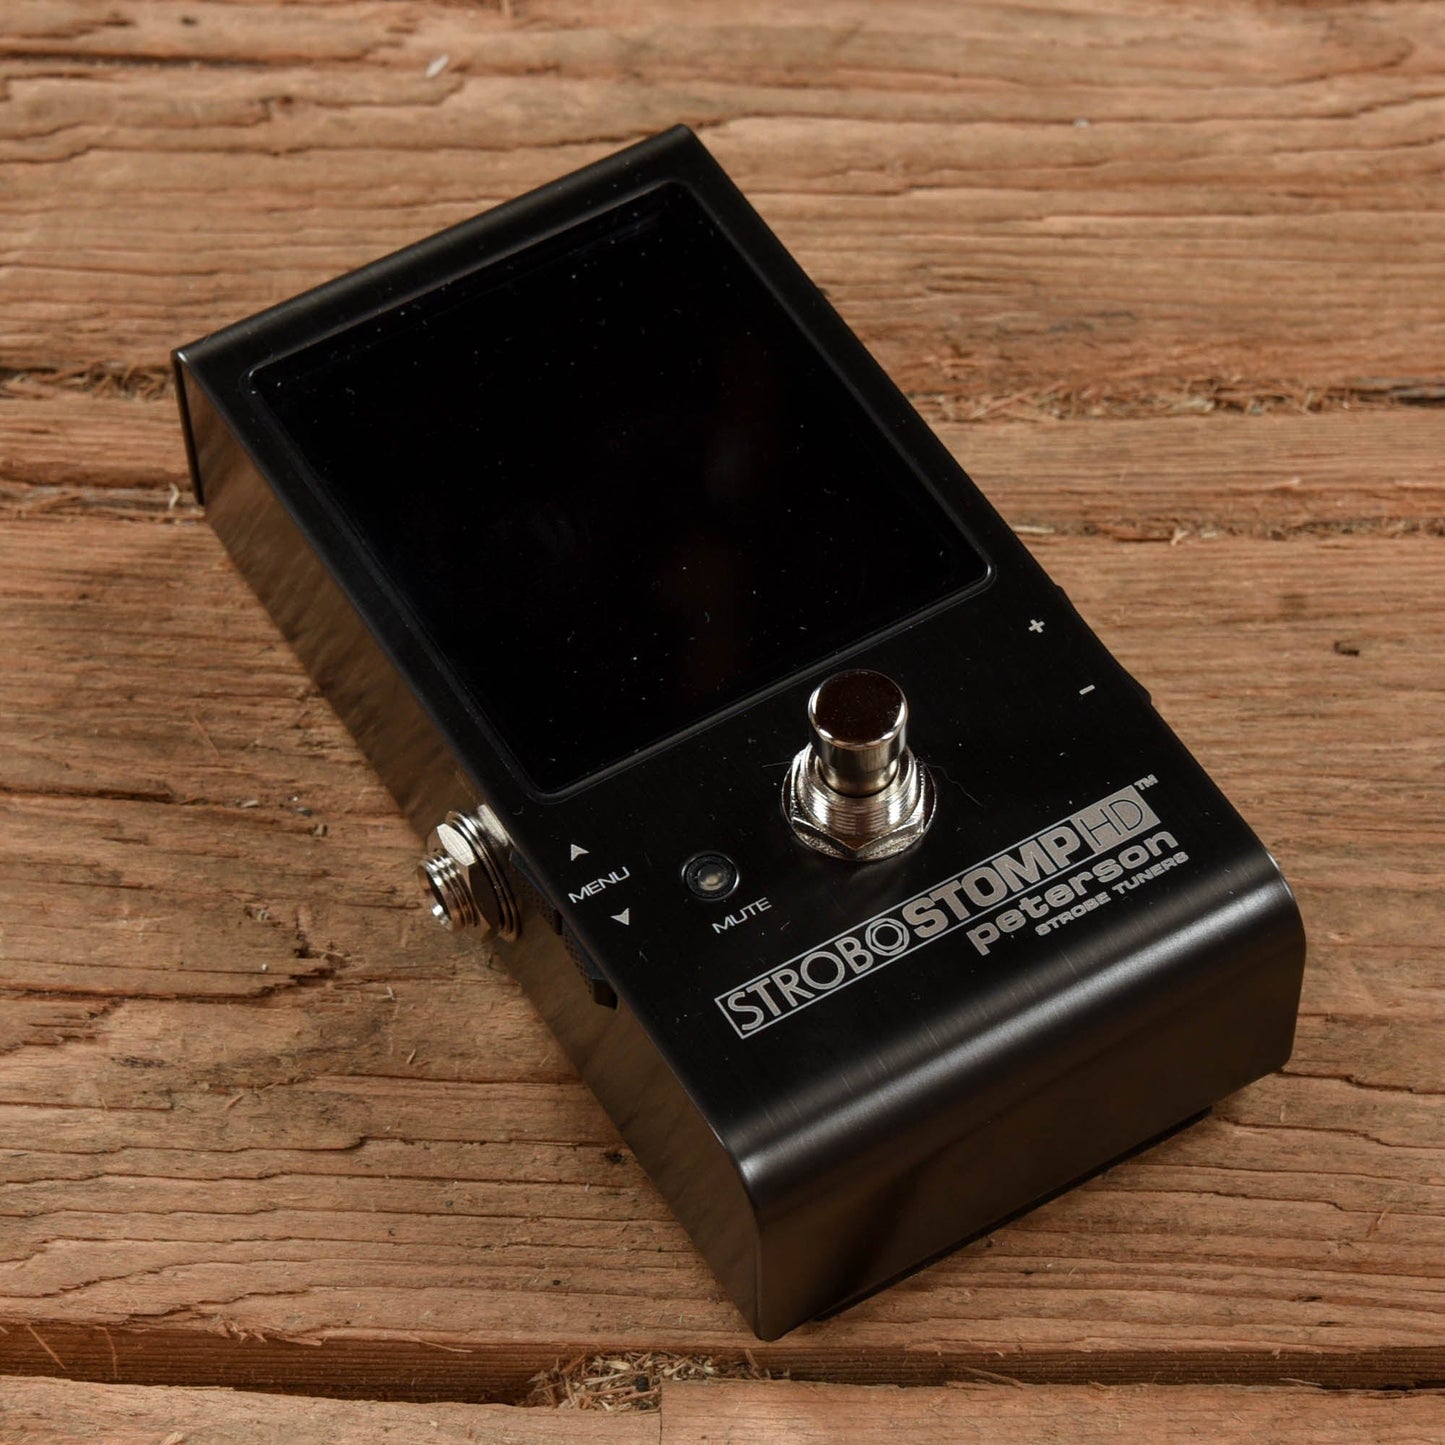 Peterson Strobostomp HD Effects and Pedals / Tuning Pedals